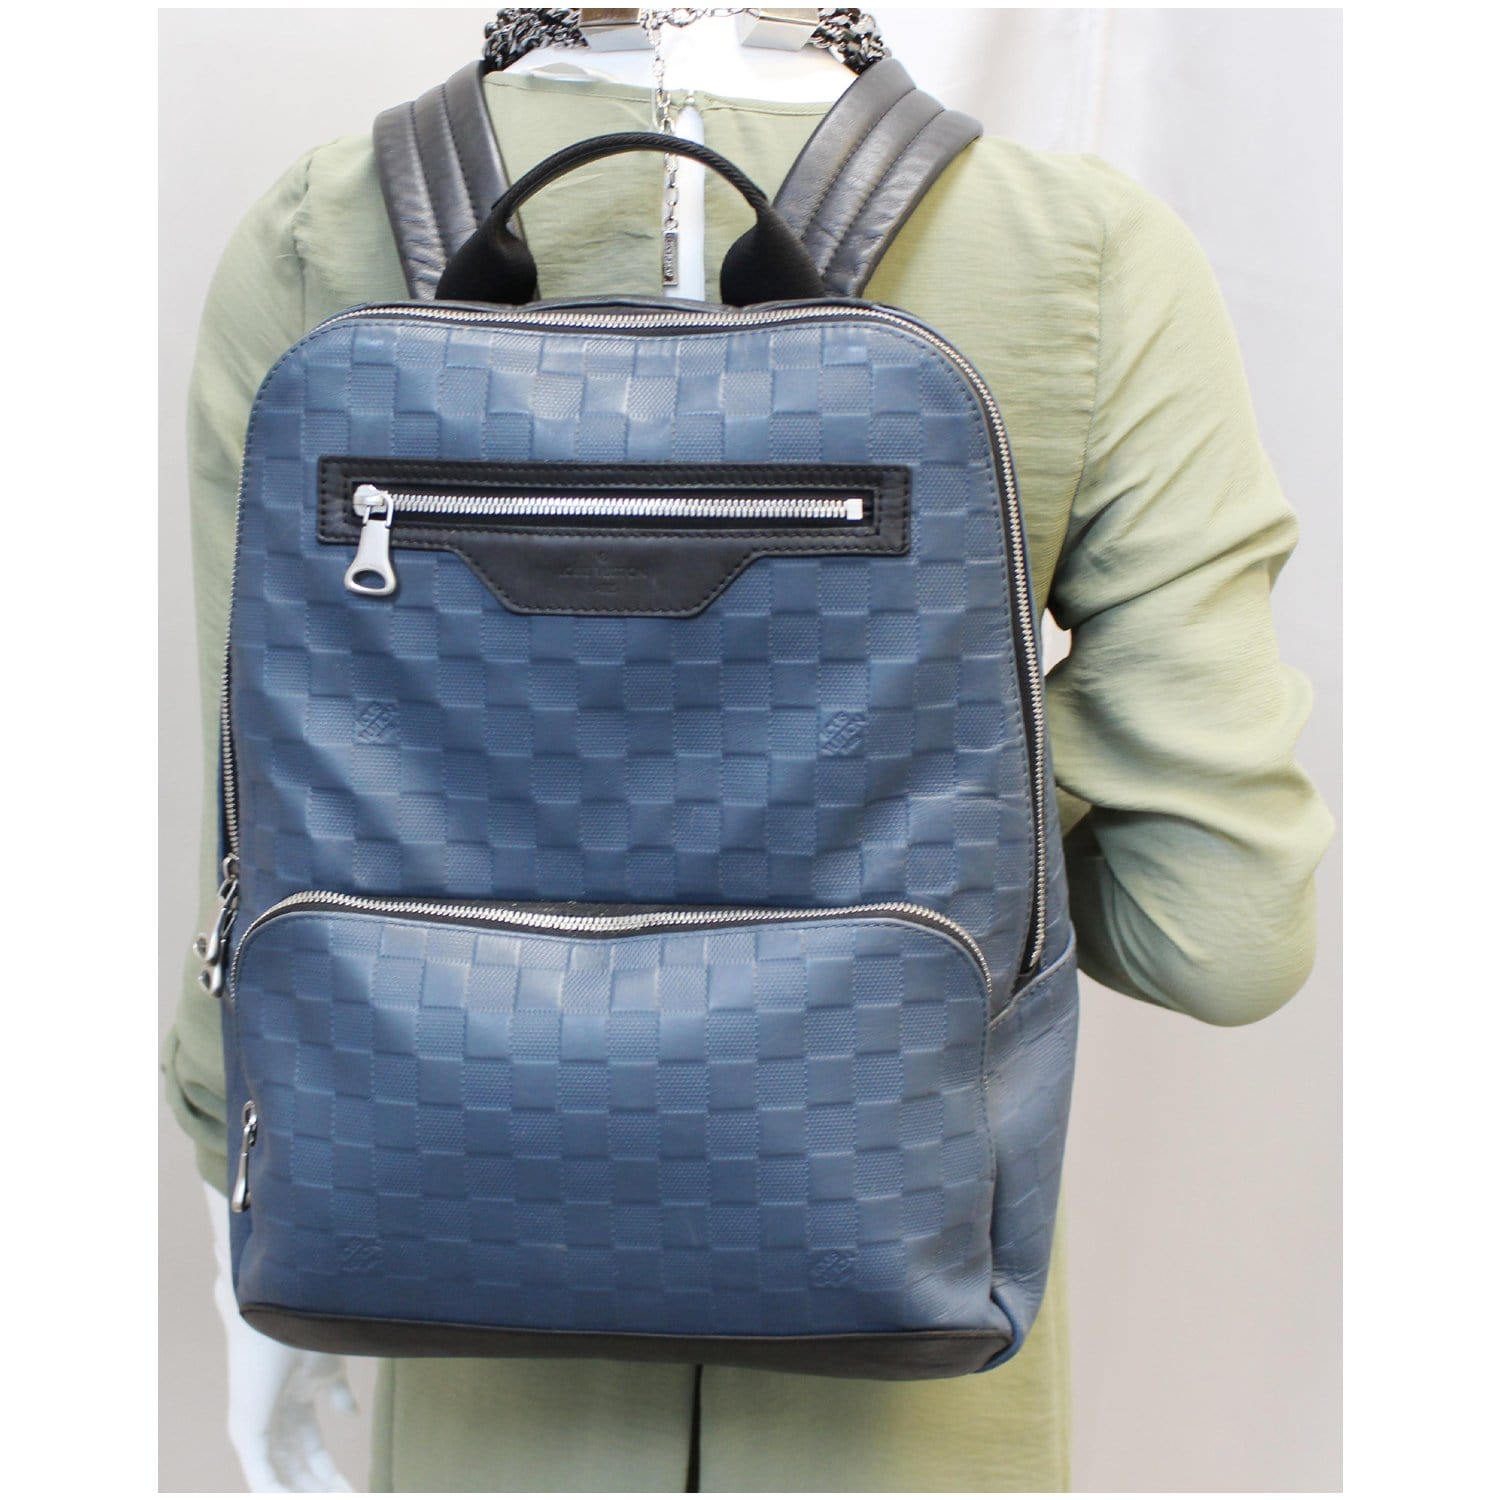 damier infini leather backpack